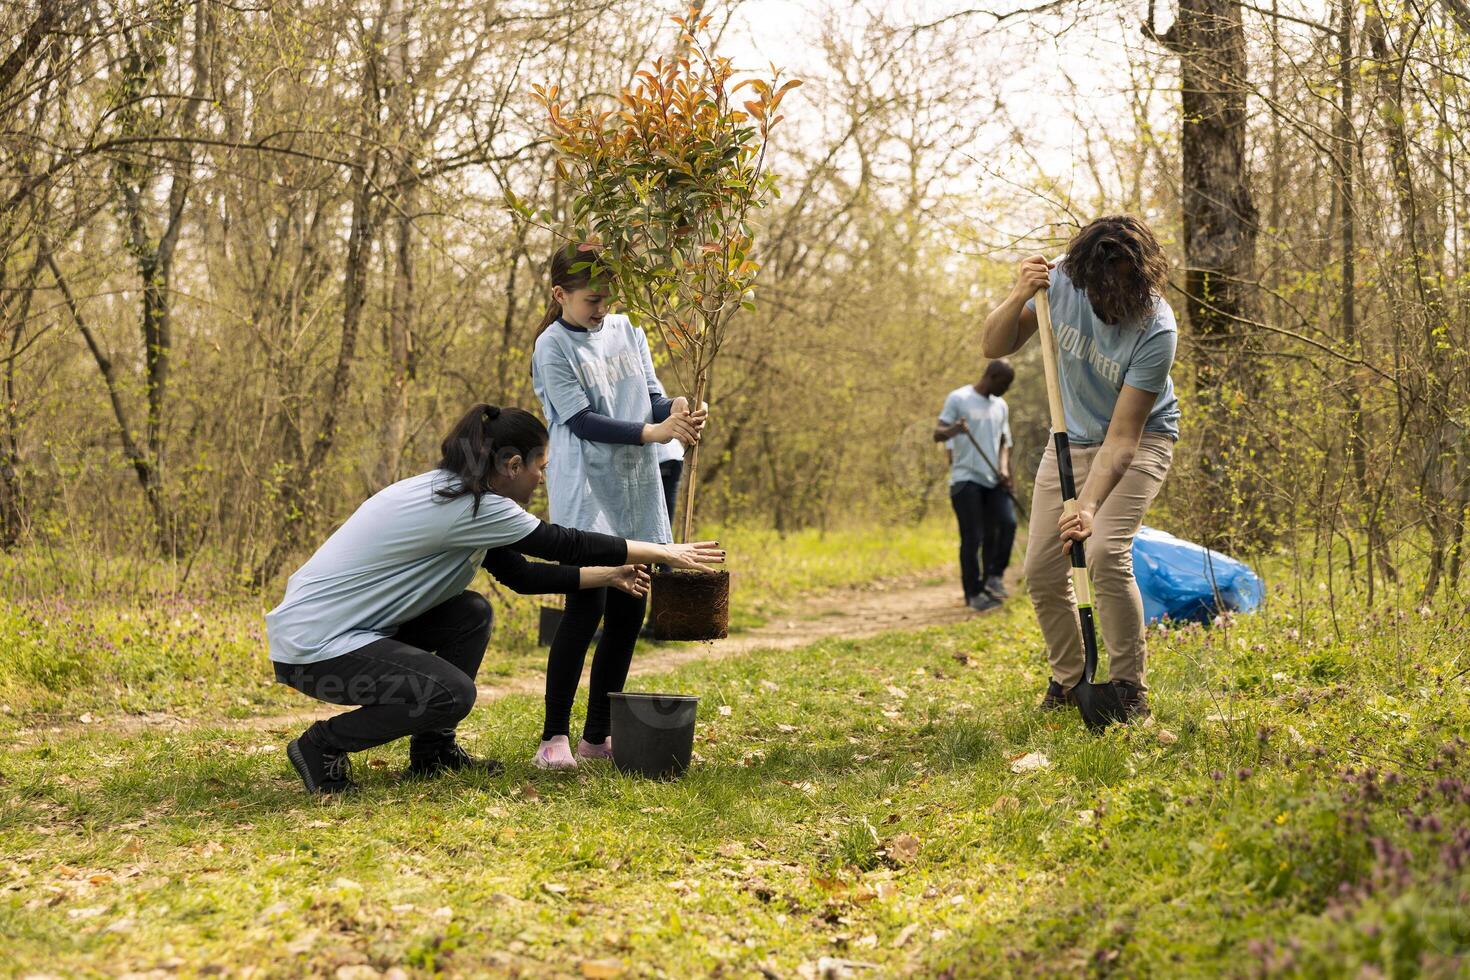 Team of activists planting trees around the woods area for nature preservation, doing voluntary work for a conservation project. Environmental enthusiasts plant seedlings together. photo